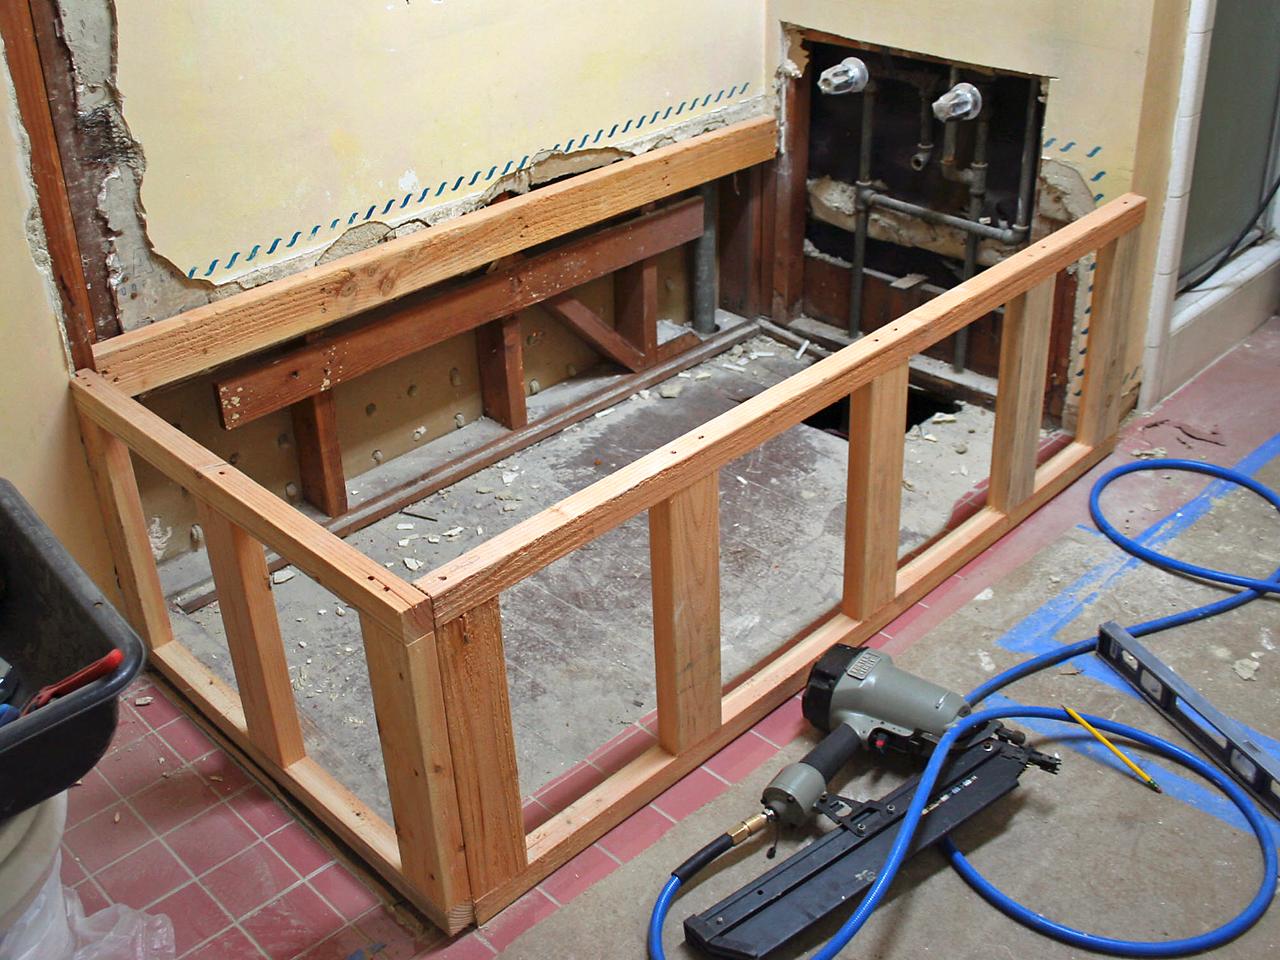 Replacing A Bathtub With Deck Tub, How To Build A Frame For A Drop In Bathtub